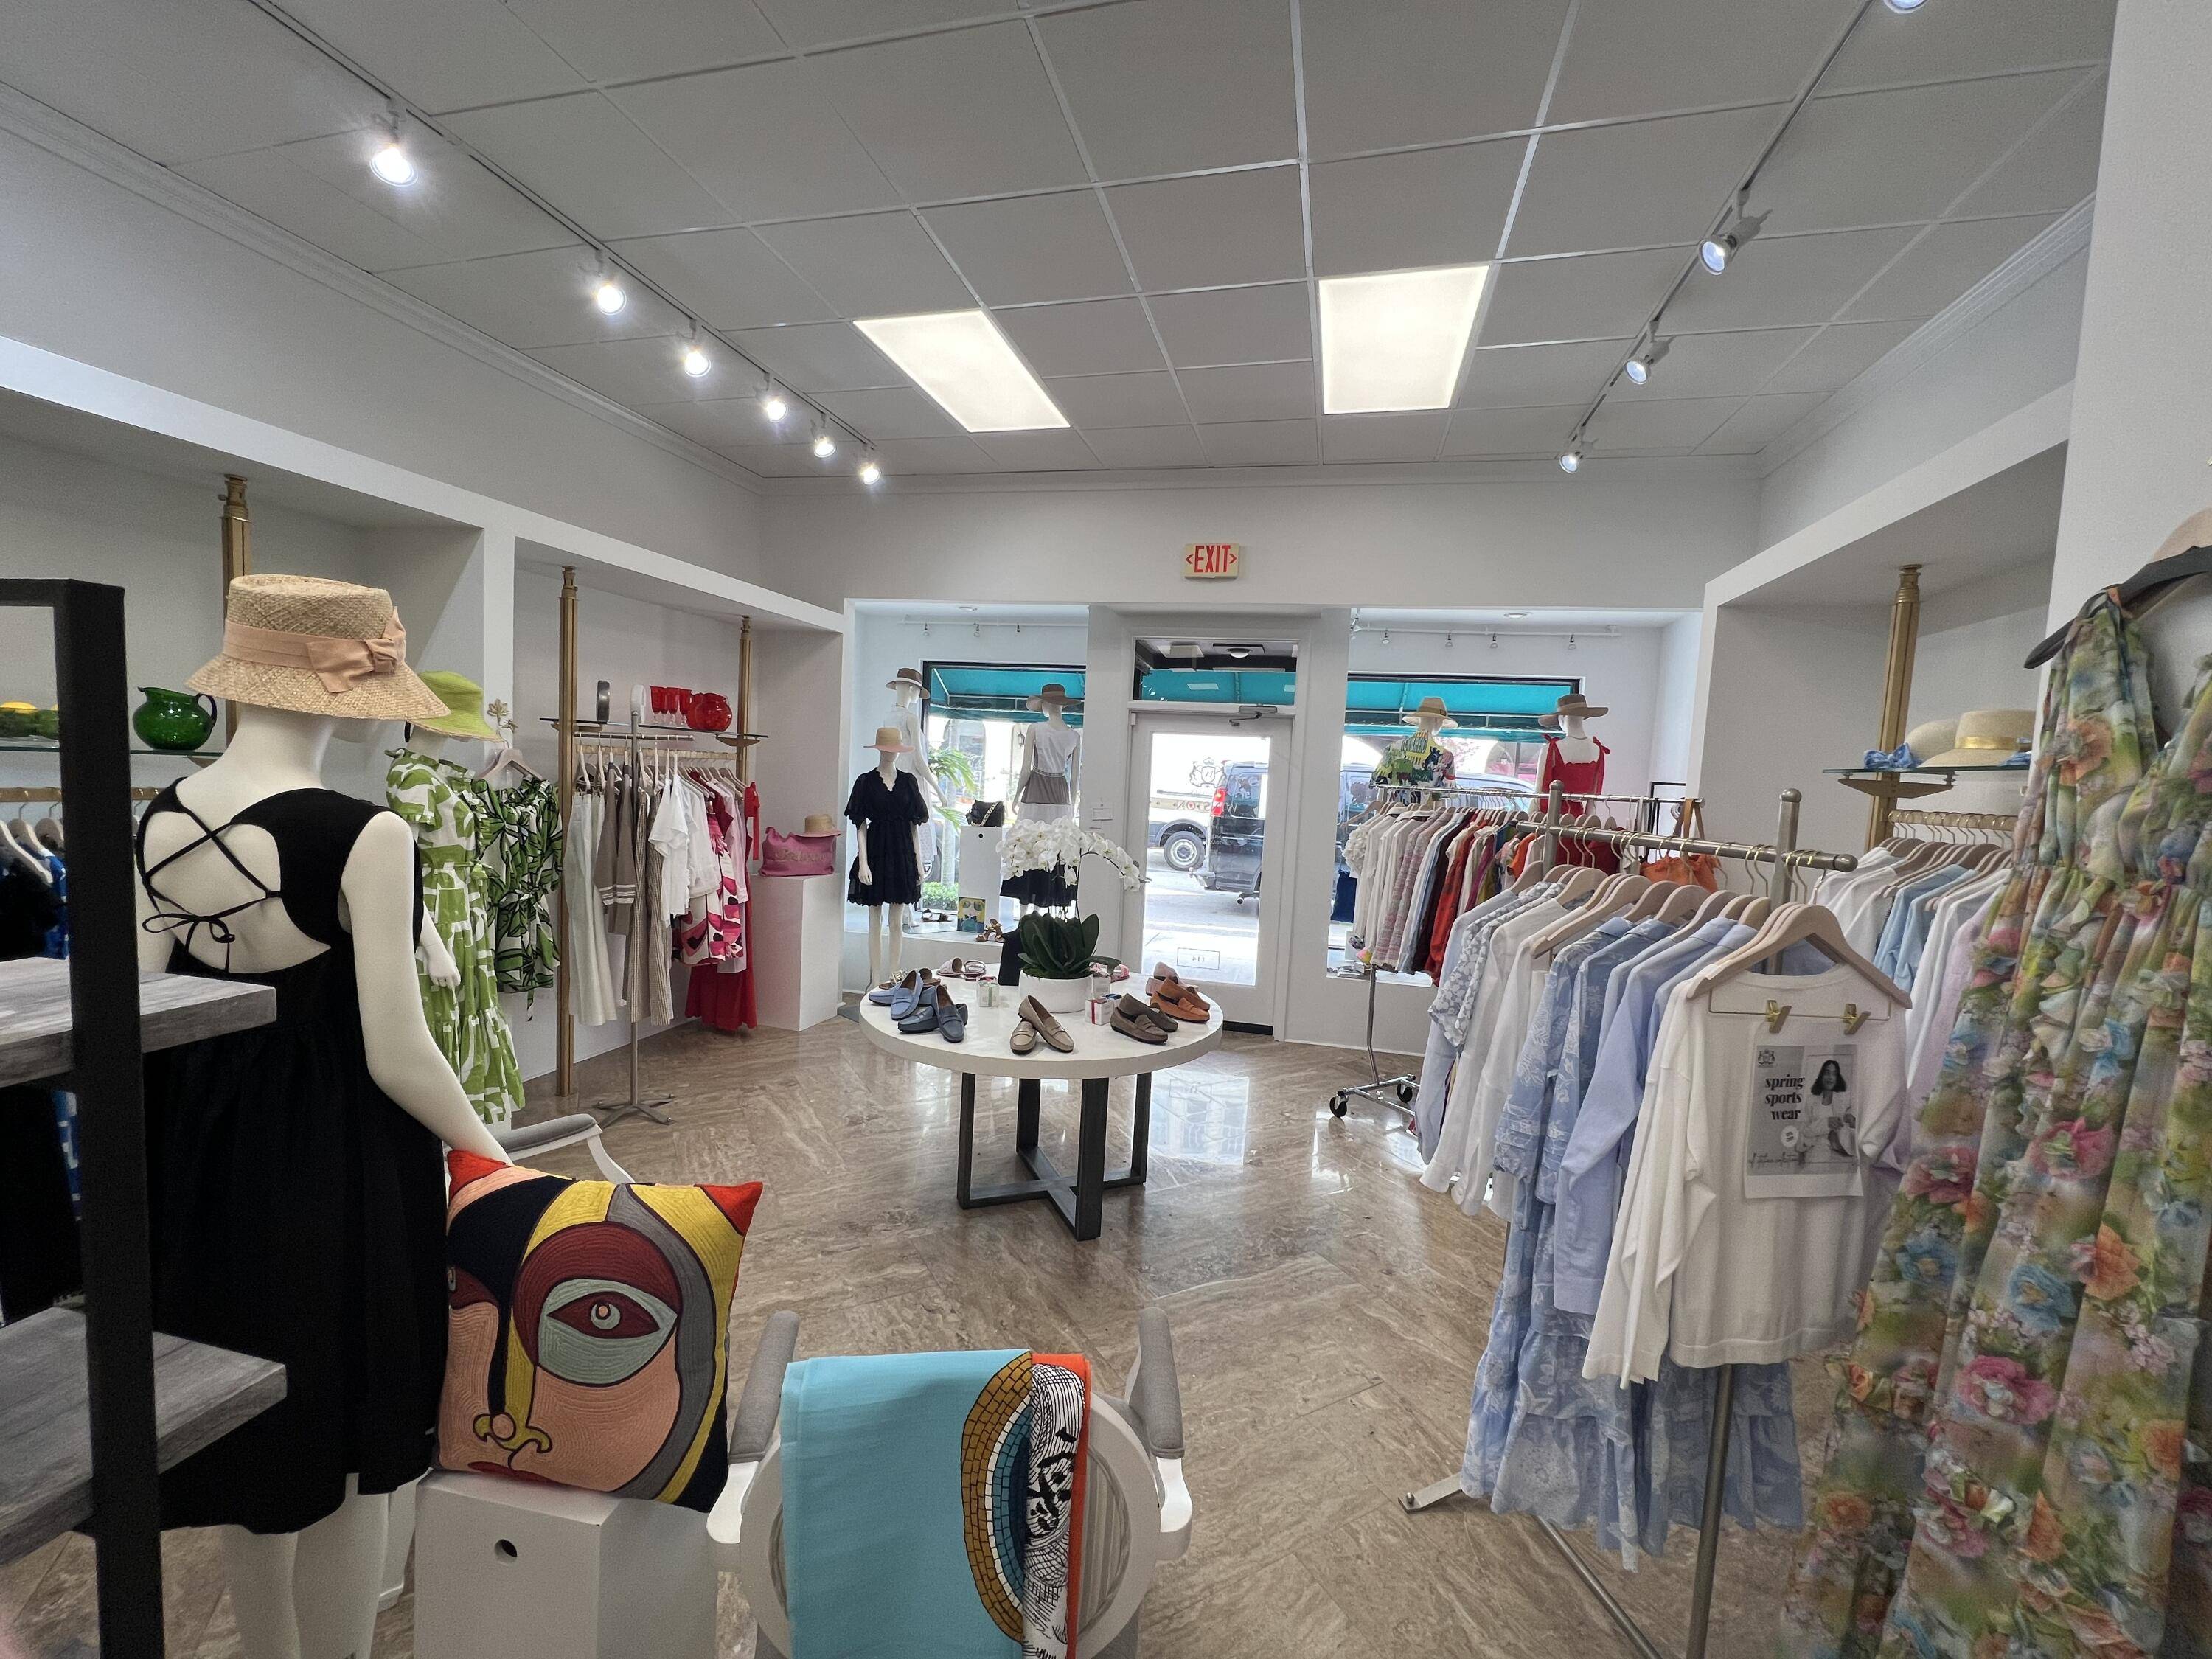 Great midtown retail location in the heart of Palm Beach island, 1, 390 SF.